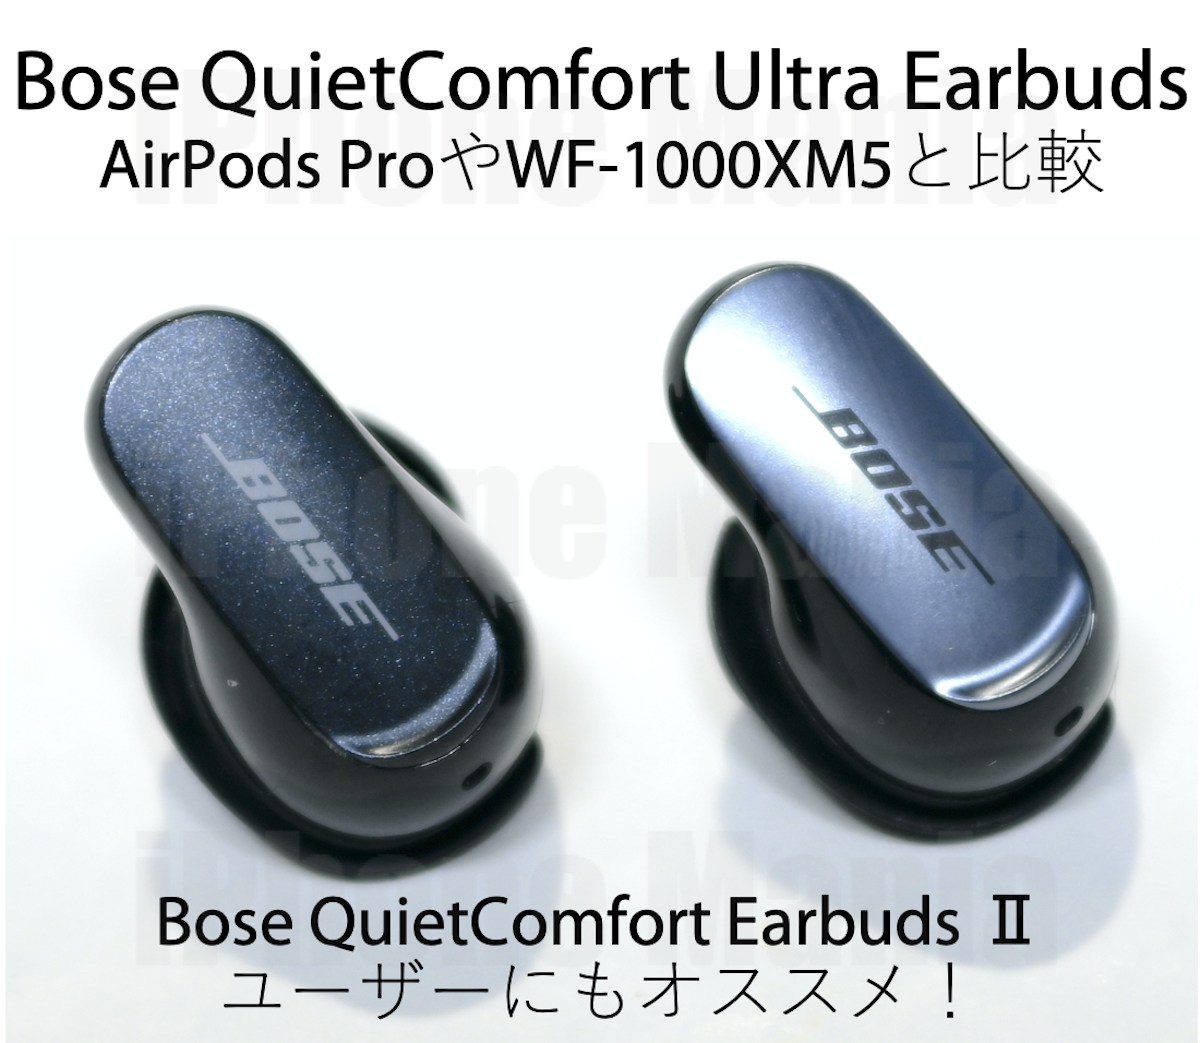 Bose QuietComfort Ultra Earbudsに買い替える価値あり！